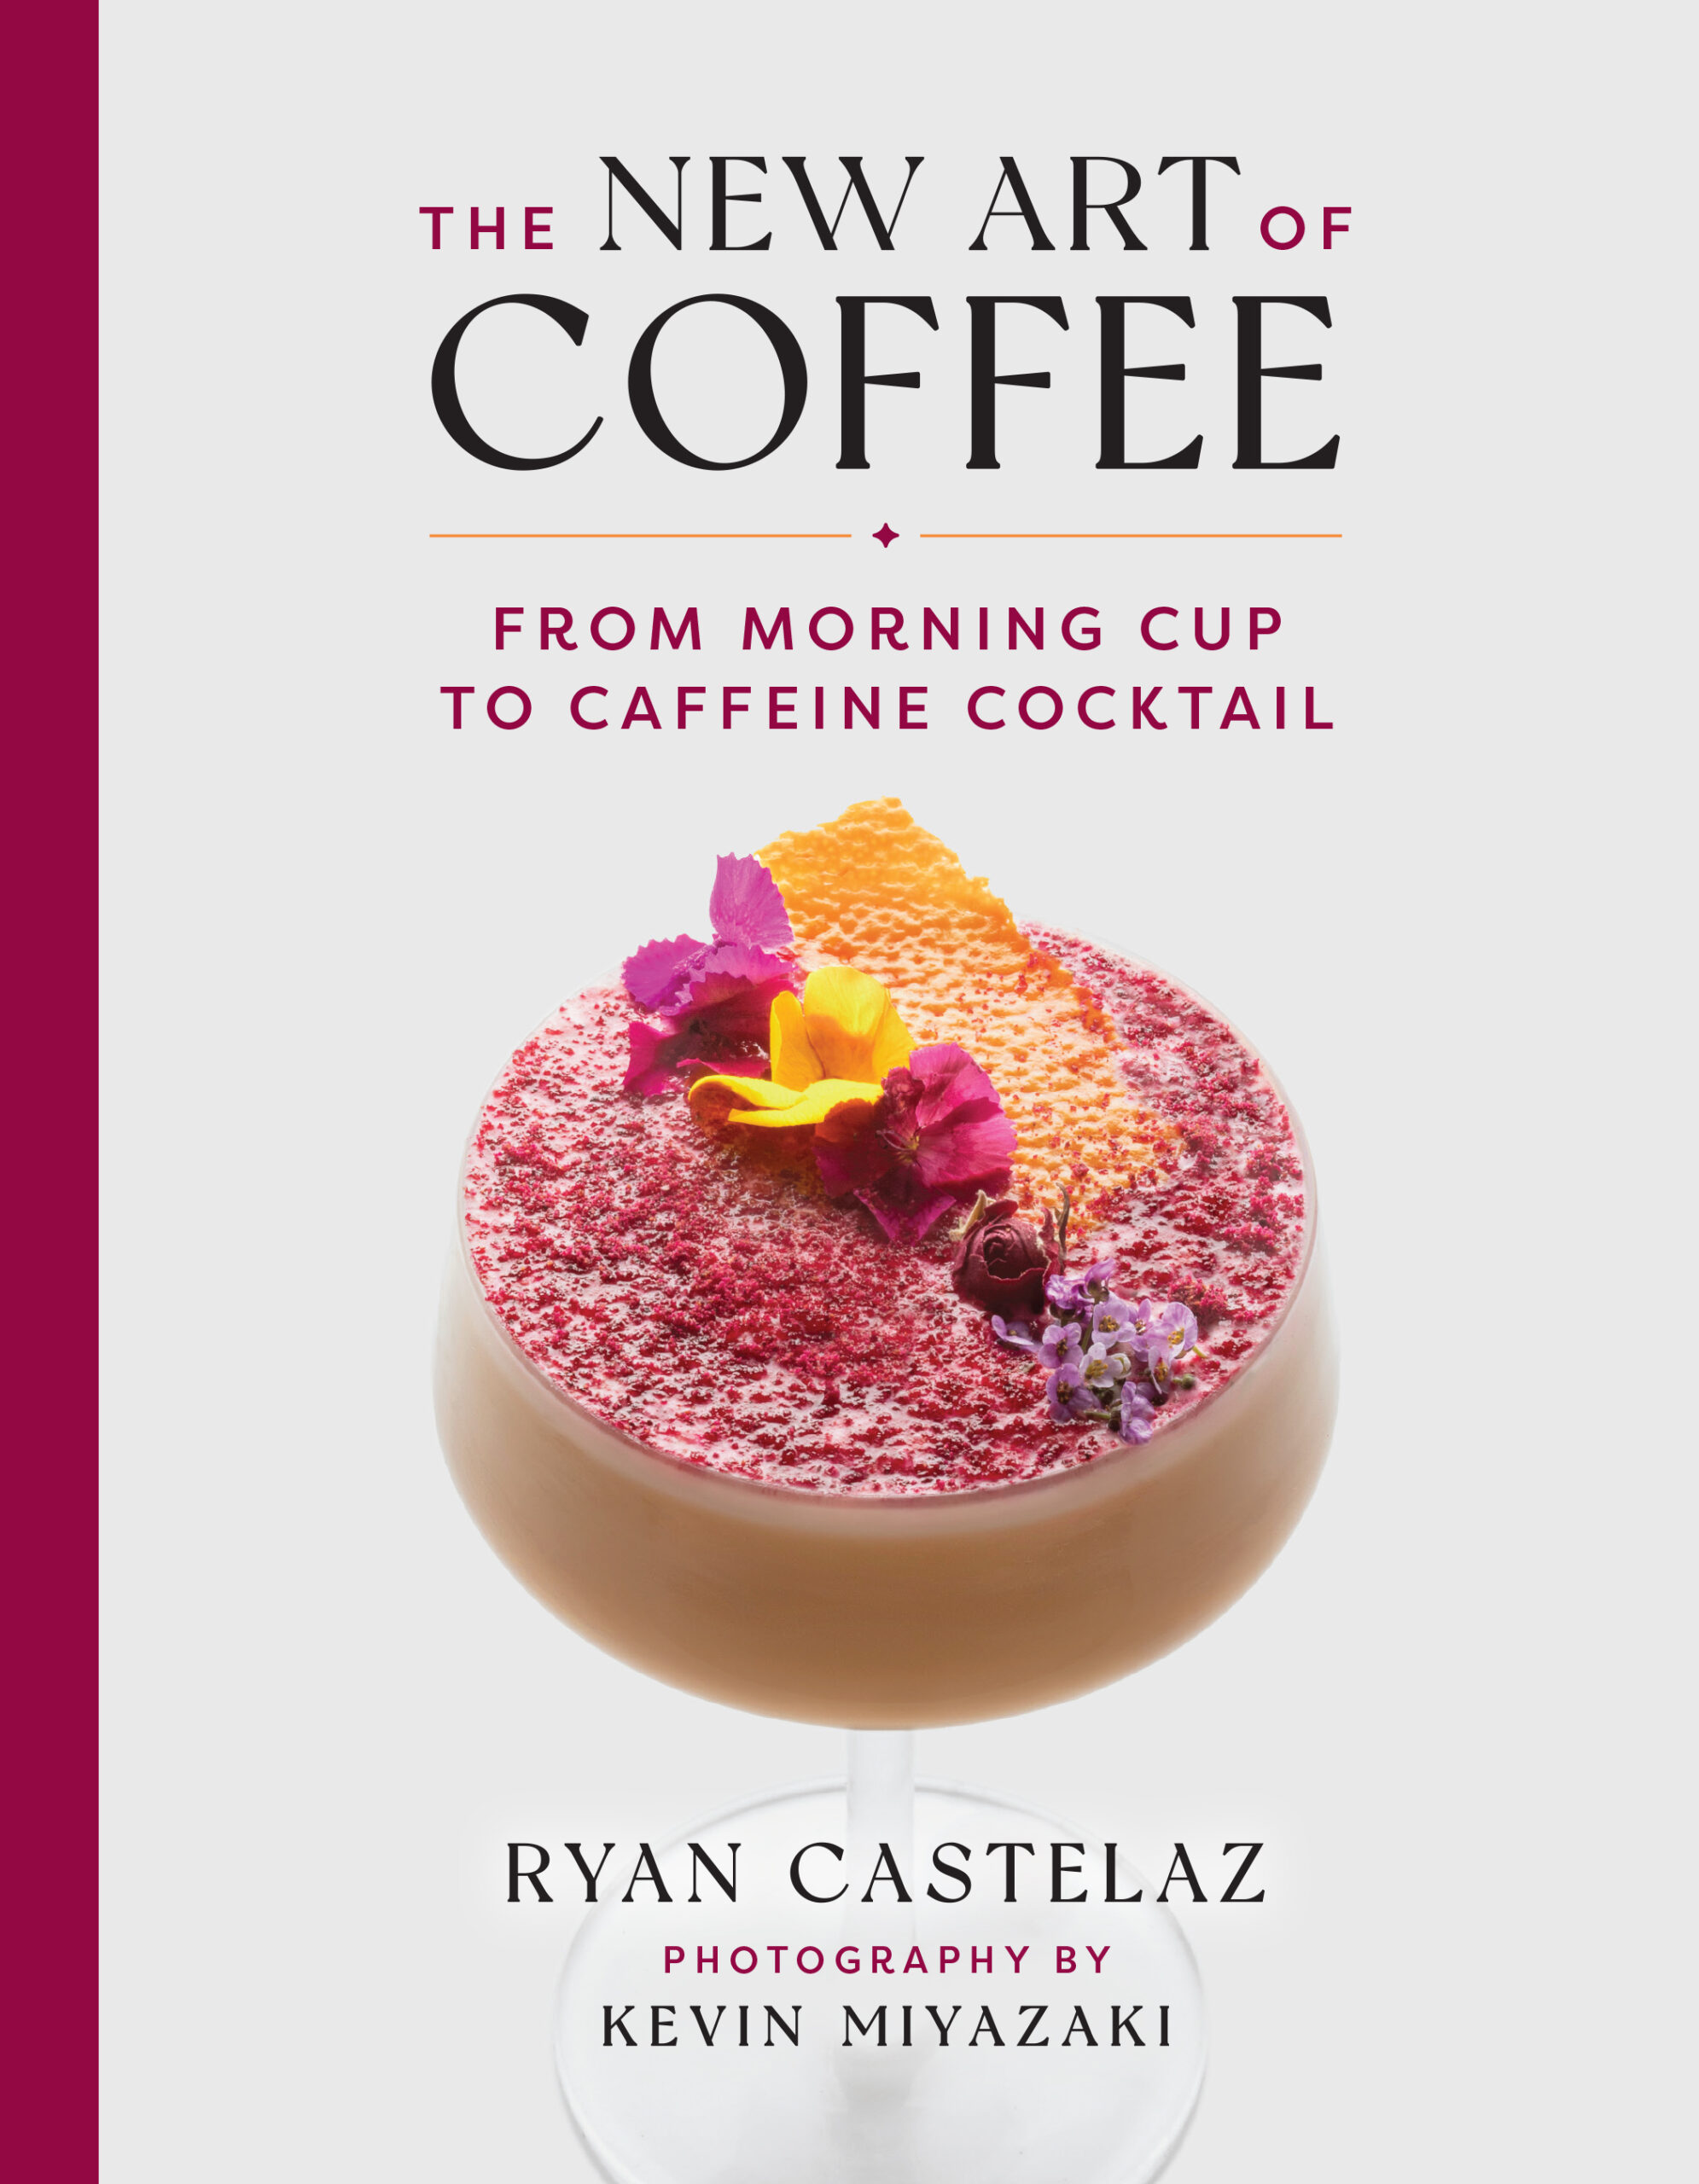 Cover of Ryan Castelaz's book, 'The New Art of Coffee: From Morning Cup to Caffeine Cocktail'